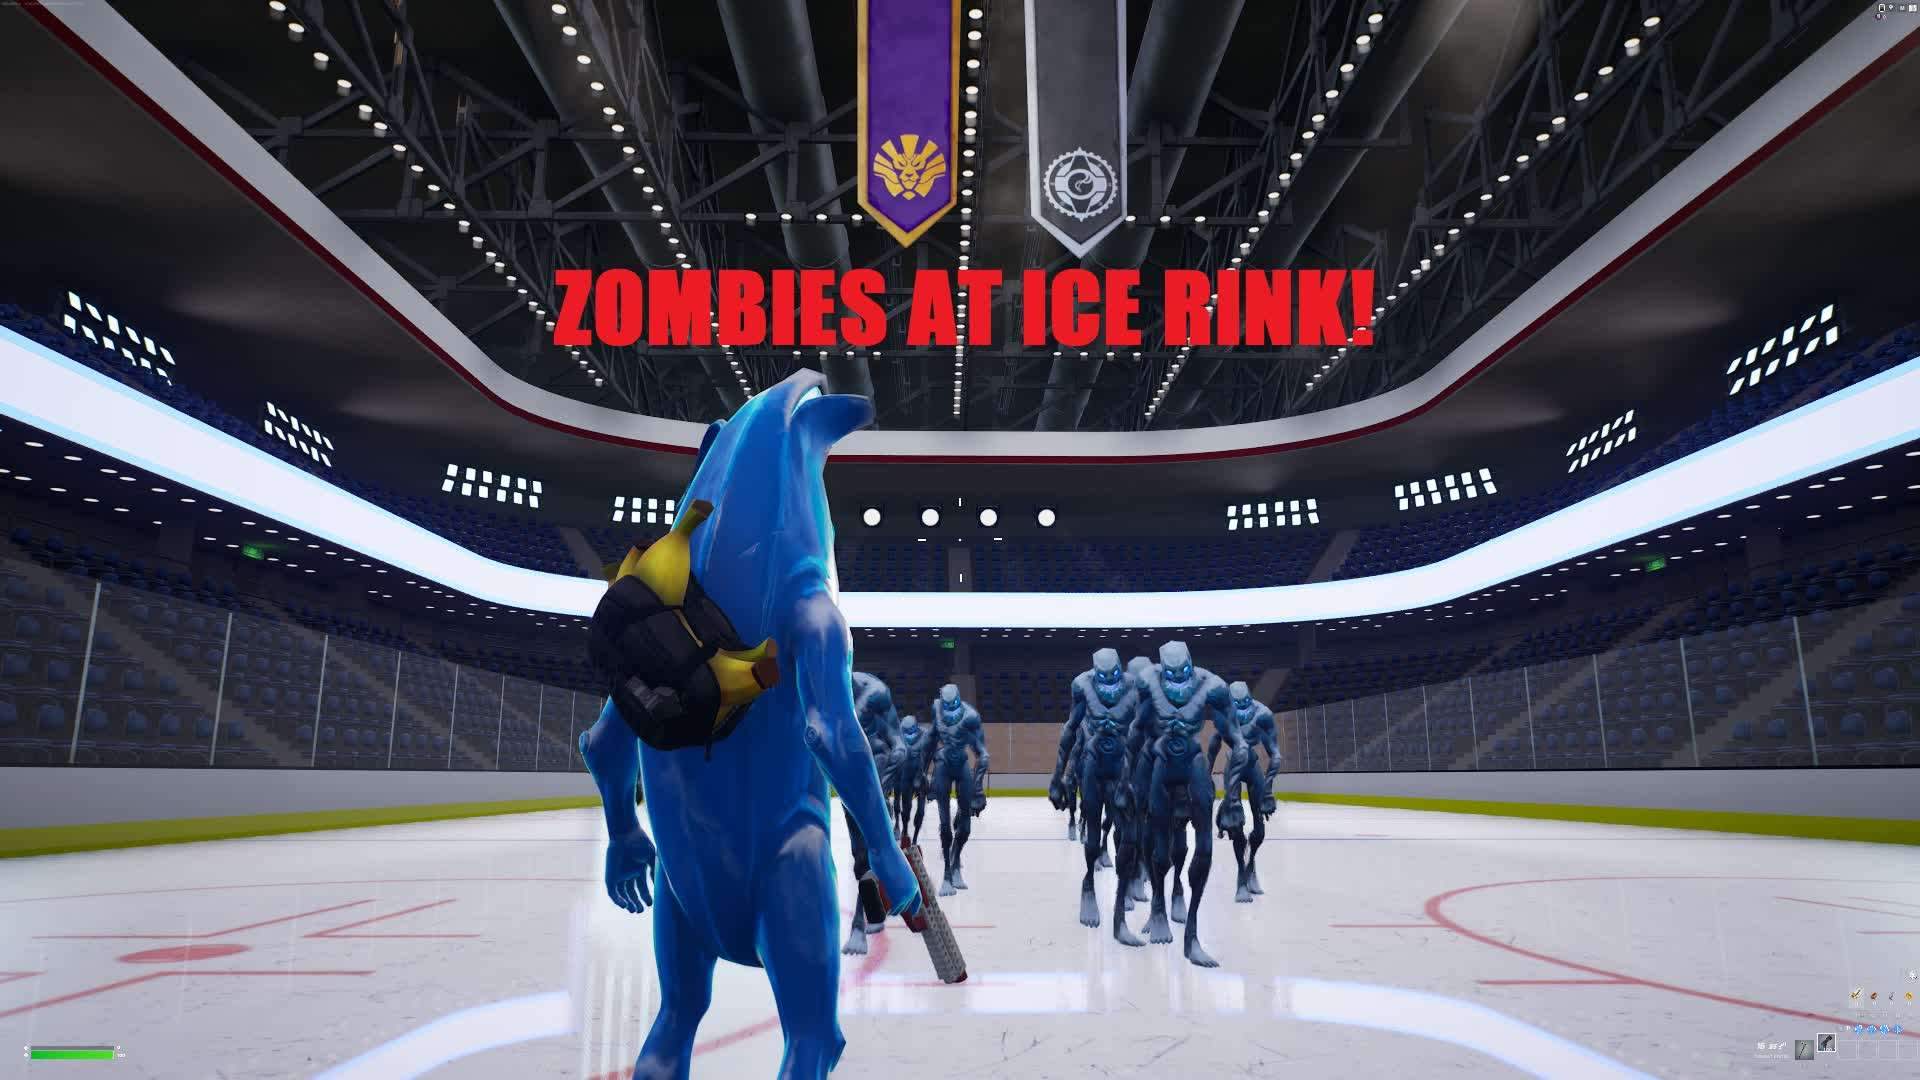 Zombies at Ice Rink